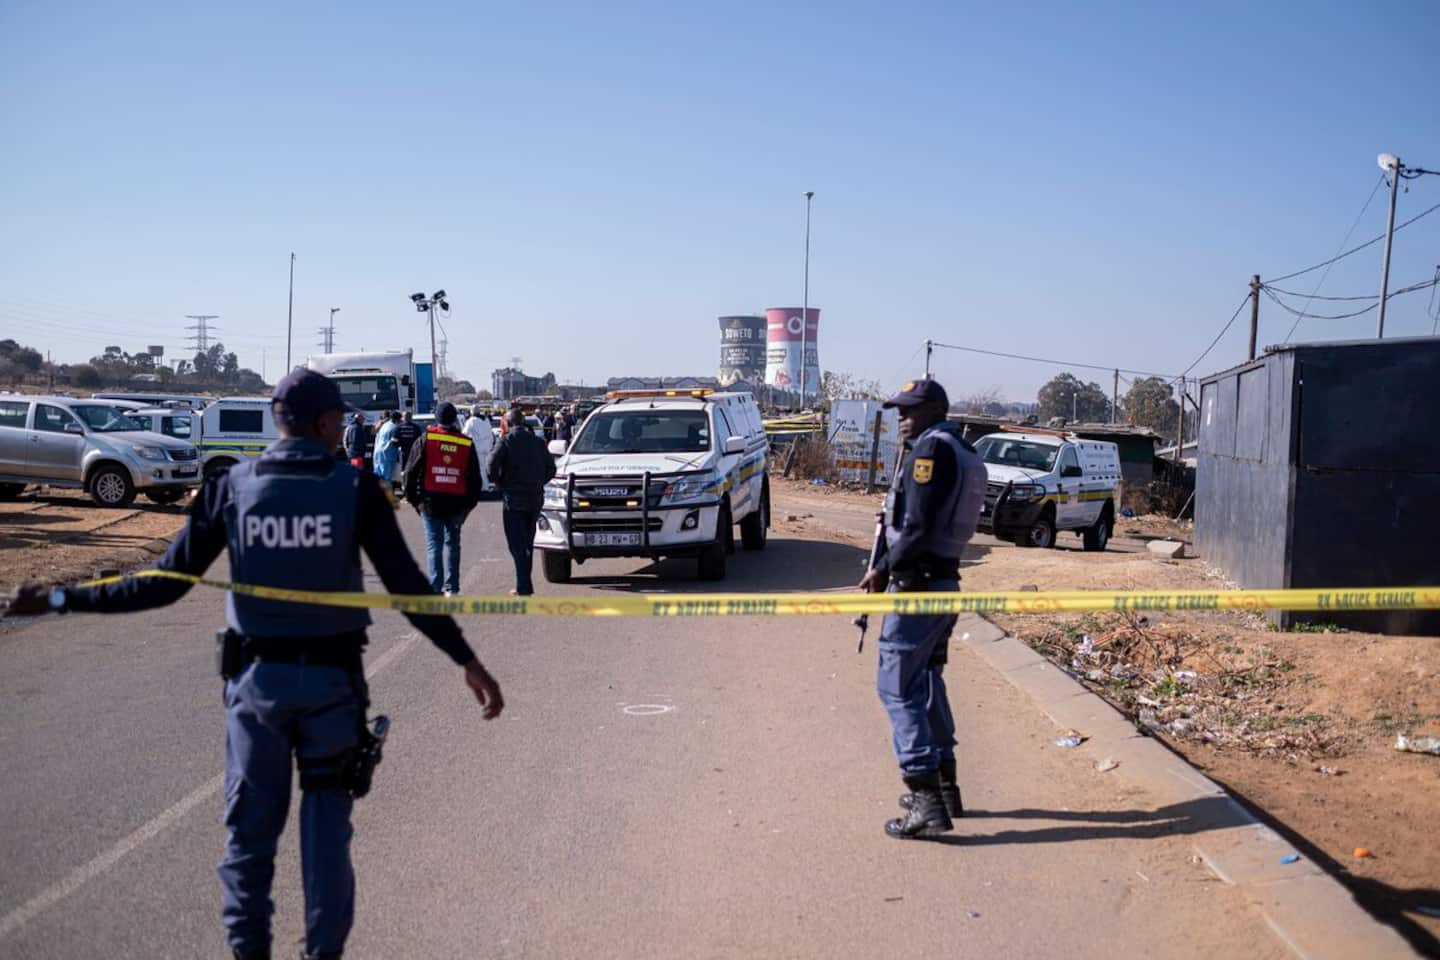 Shooting in a bar in Soweto: new death toll of 16